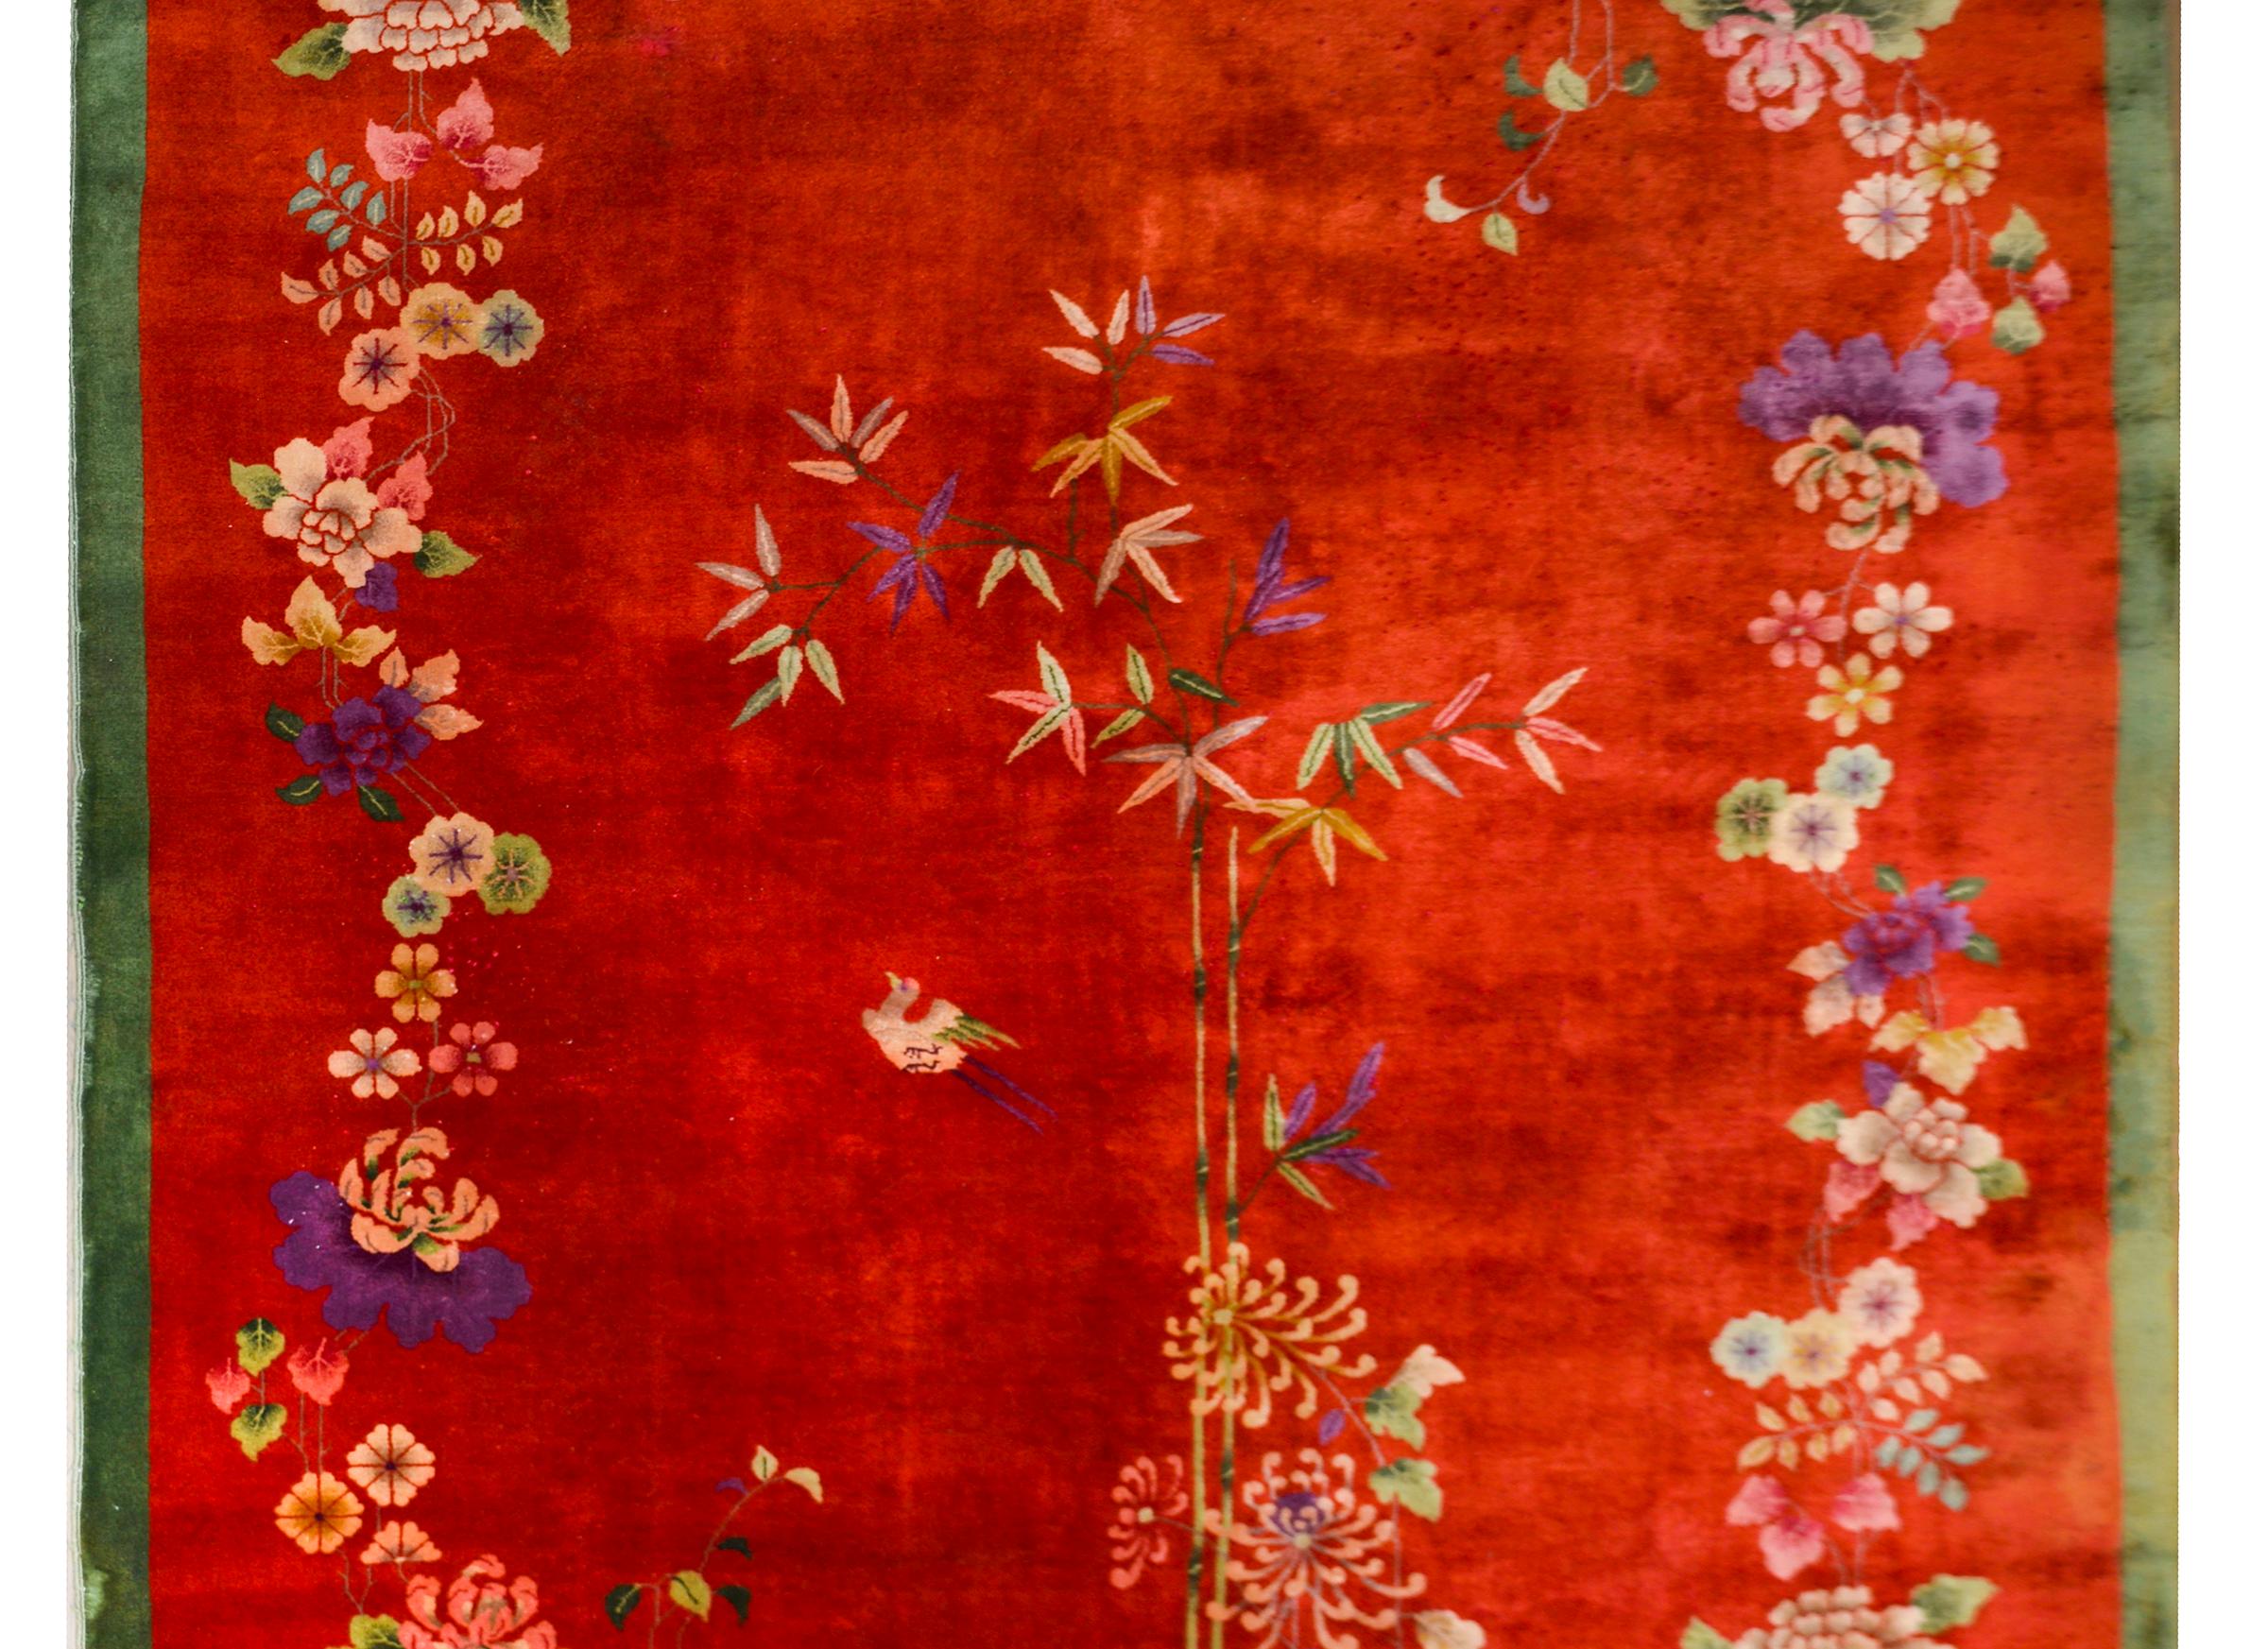 An exceptional early 20th century Chinese Art Deco rug with a bold red field surrounded by a thin green border. The field is overlaid with multicolored auspicious plants and flowers including cherry blossoms, peonies, chrysanthemum, and bamboo, each